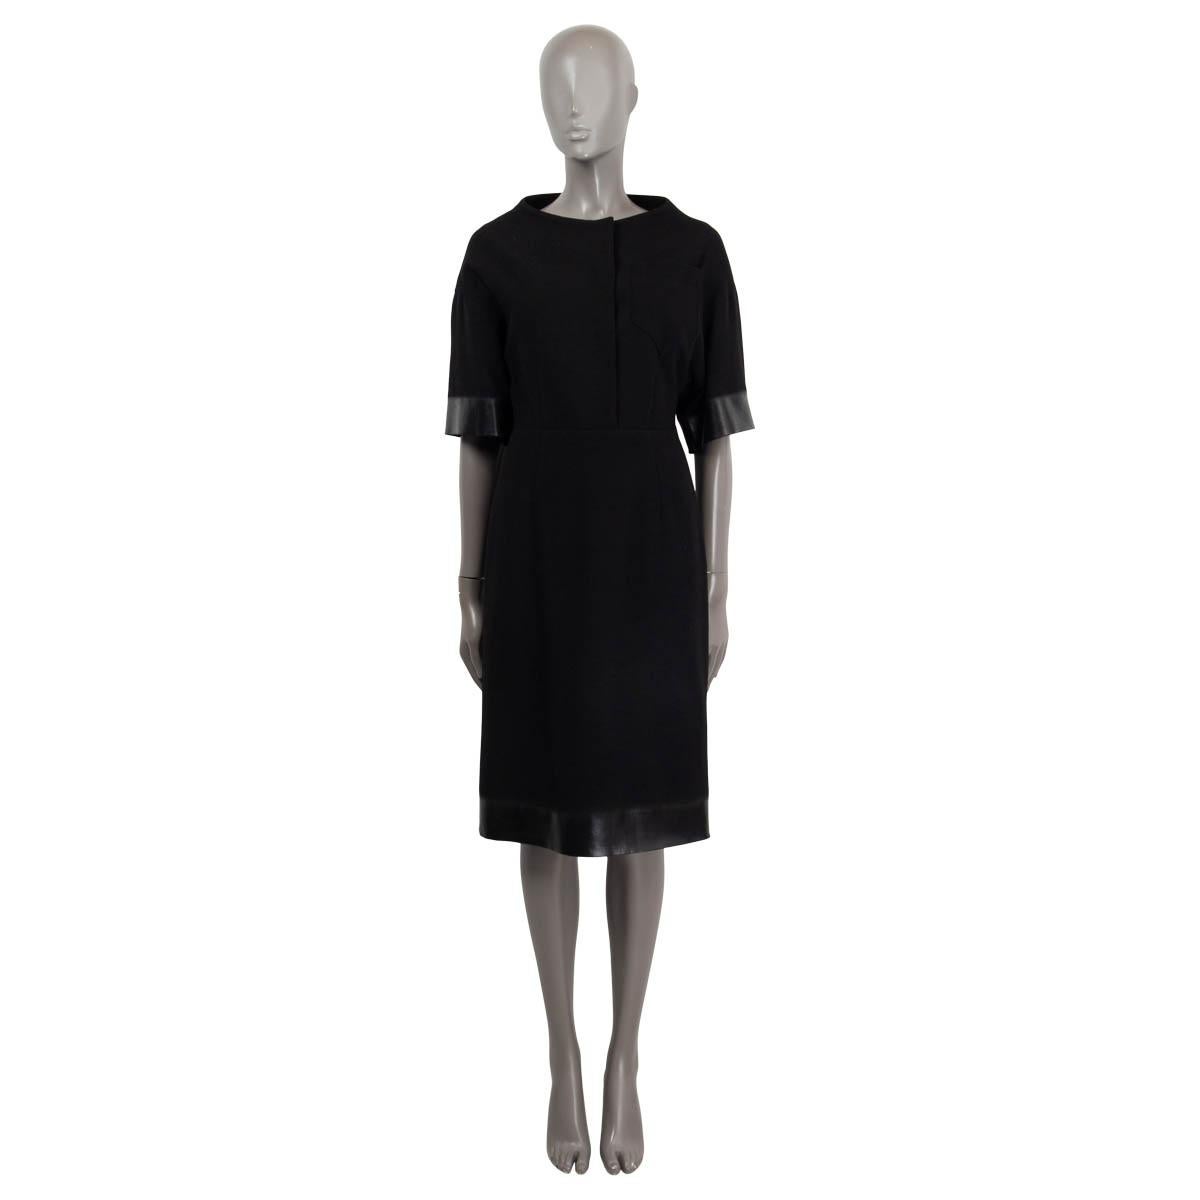 100% authentic Prada dress in black virgin wool (95%), polyamide (4%), elastane (1%). Features short sleeves, a PVC trim on the sleeves and the hemline. Has a patch pocket on the chest. Opens with concealed push buttons on the front and a conealed